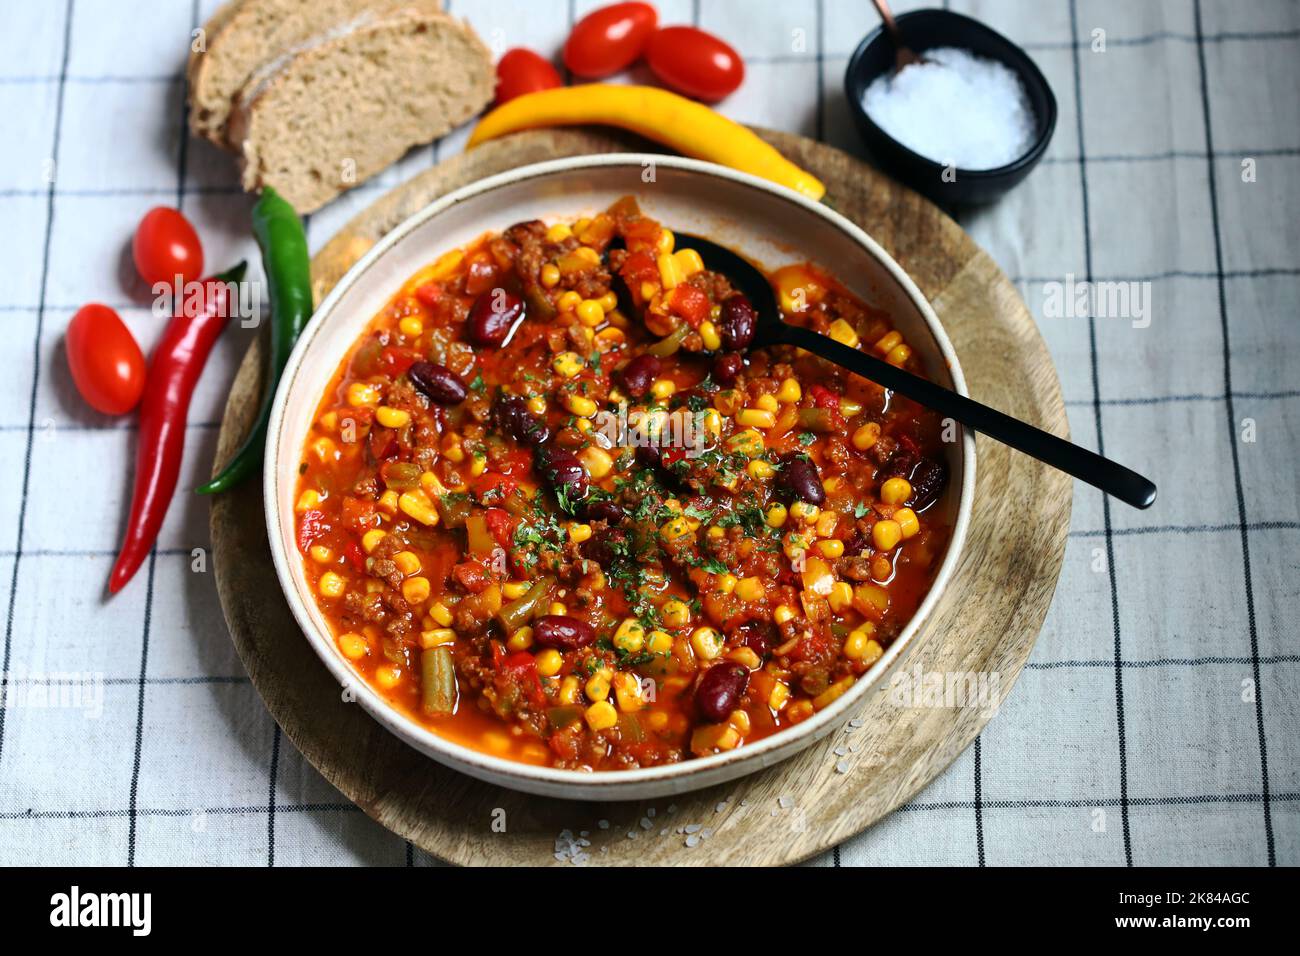 Chile con carne. Traditional Mexican dish. Stock Photo